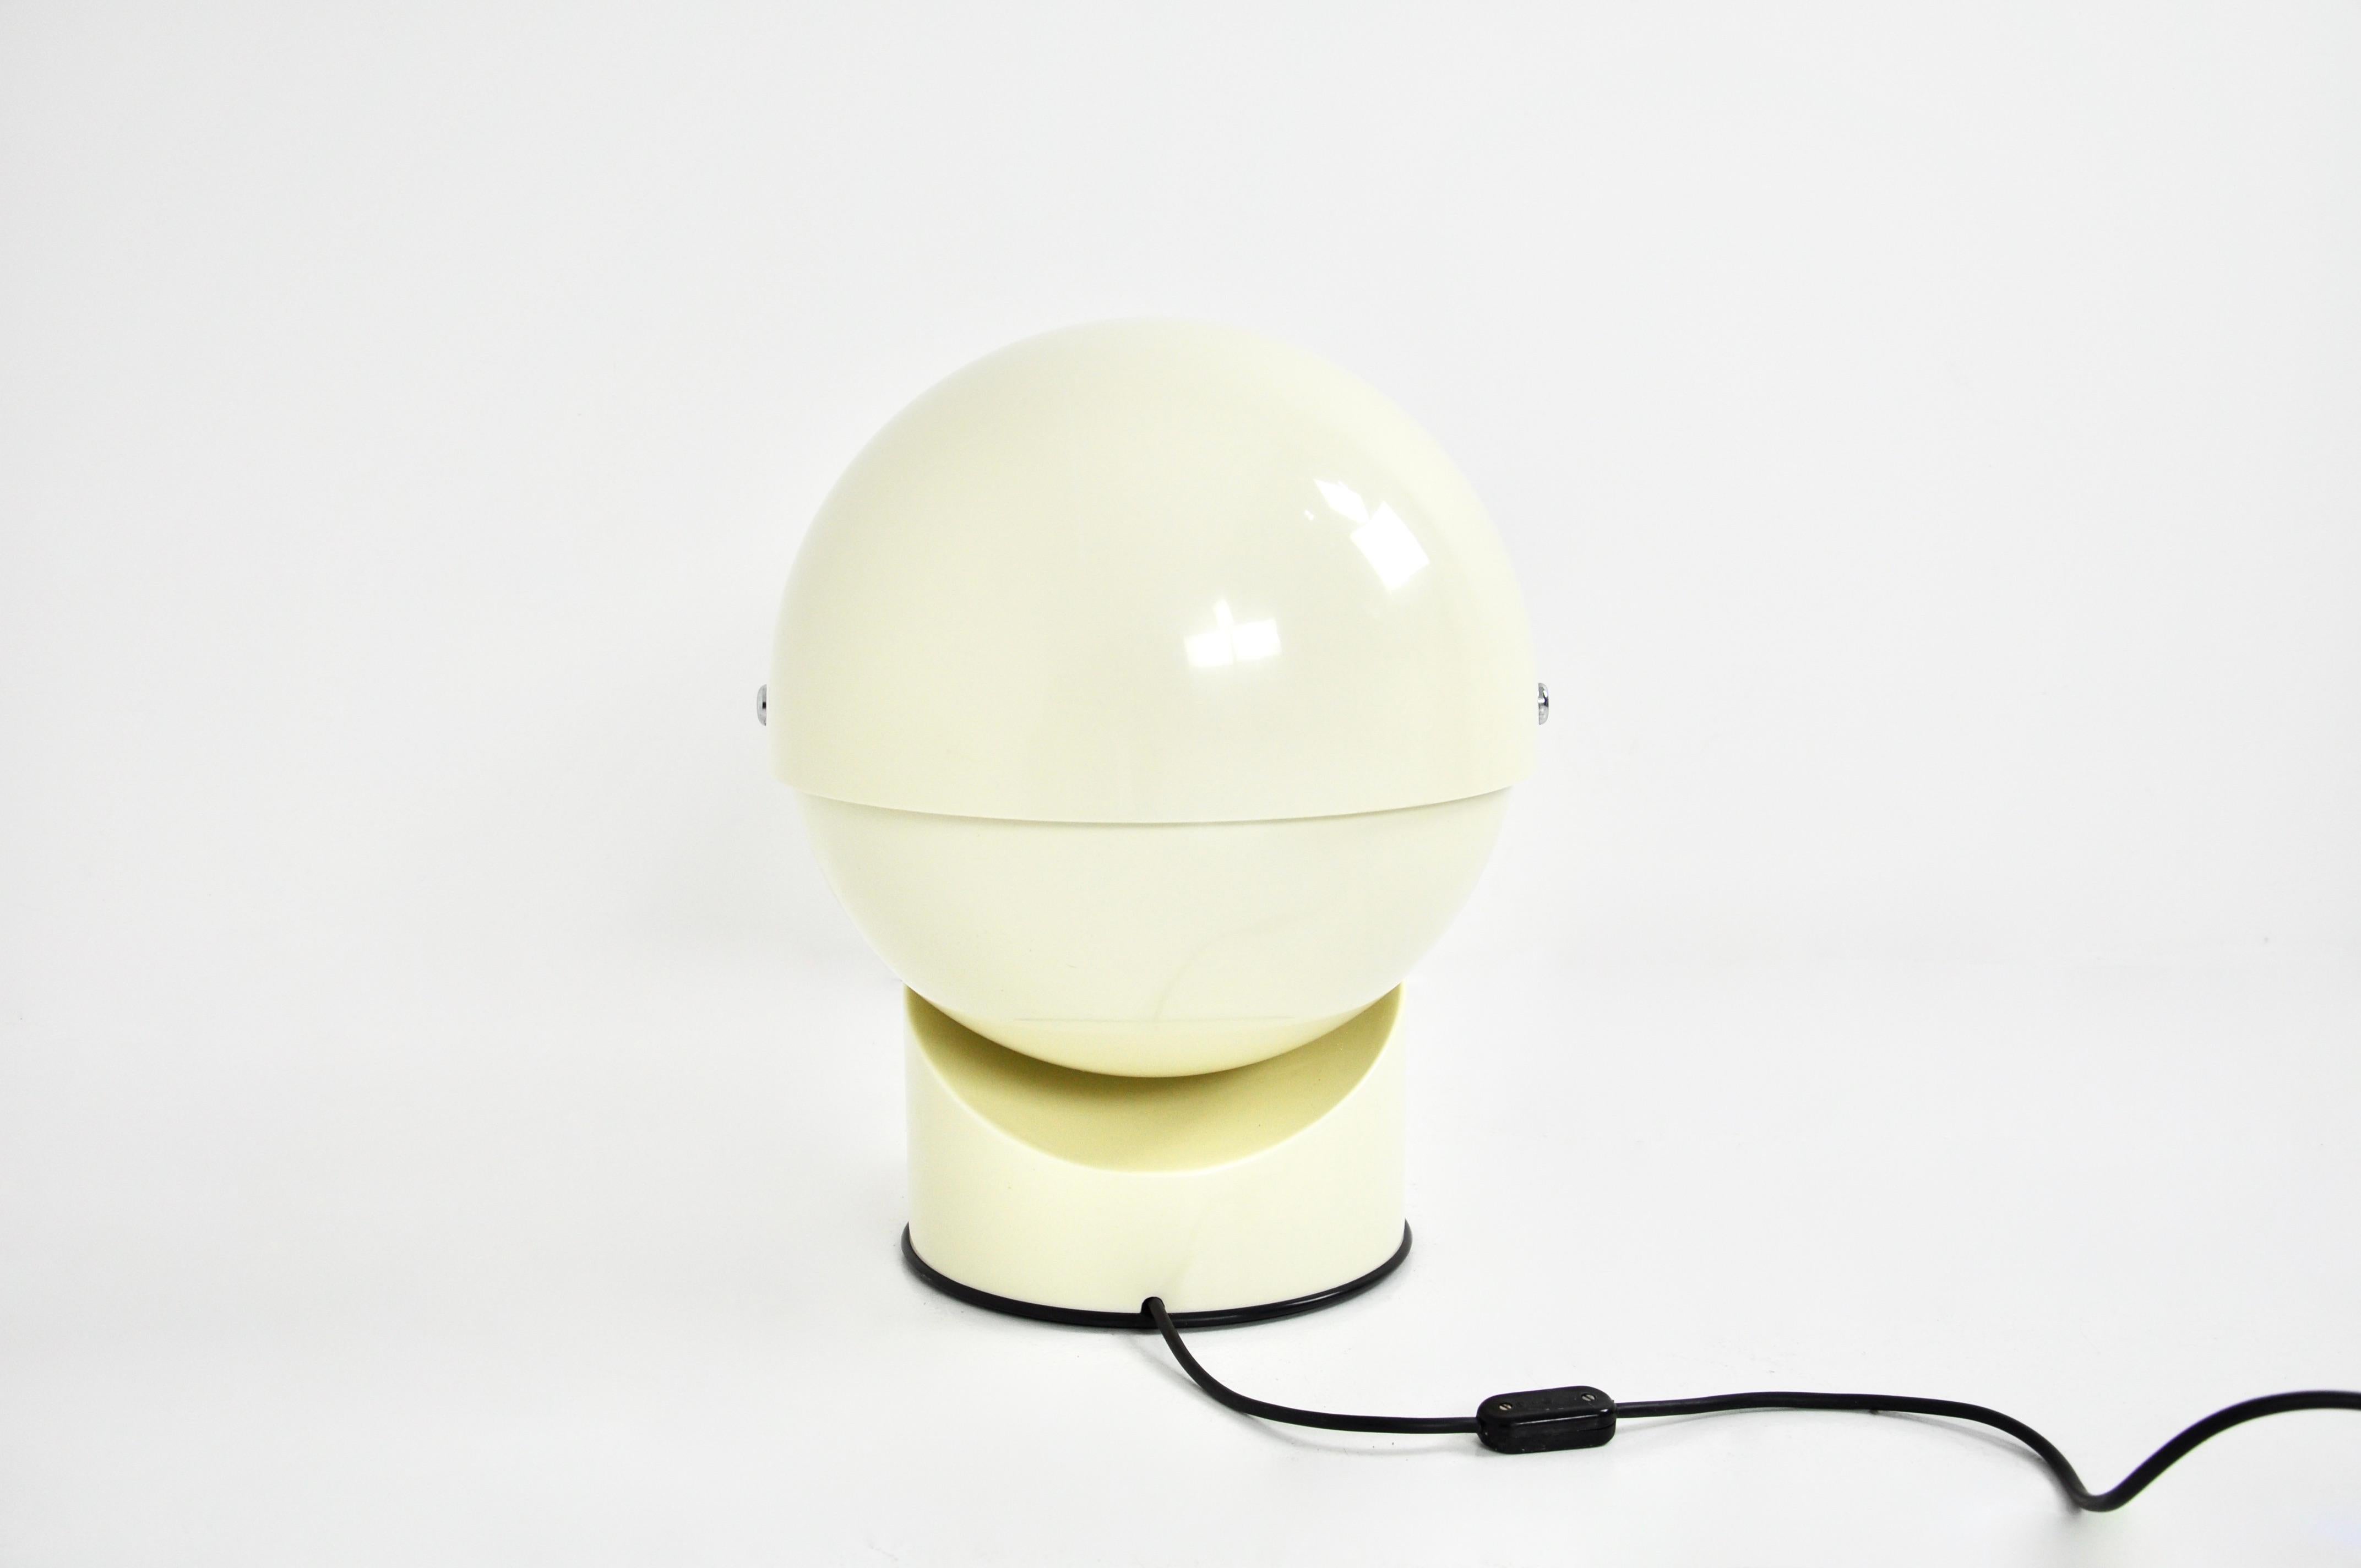 Large Pileo-Mezzo table lamp by Gae Aulenti for Artemide, 1970s For Sale 1